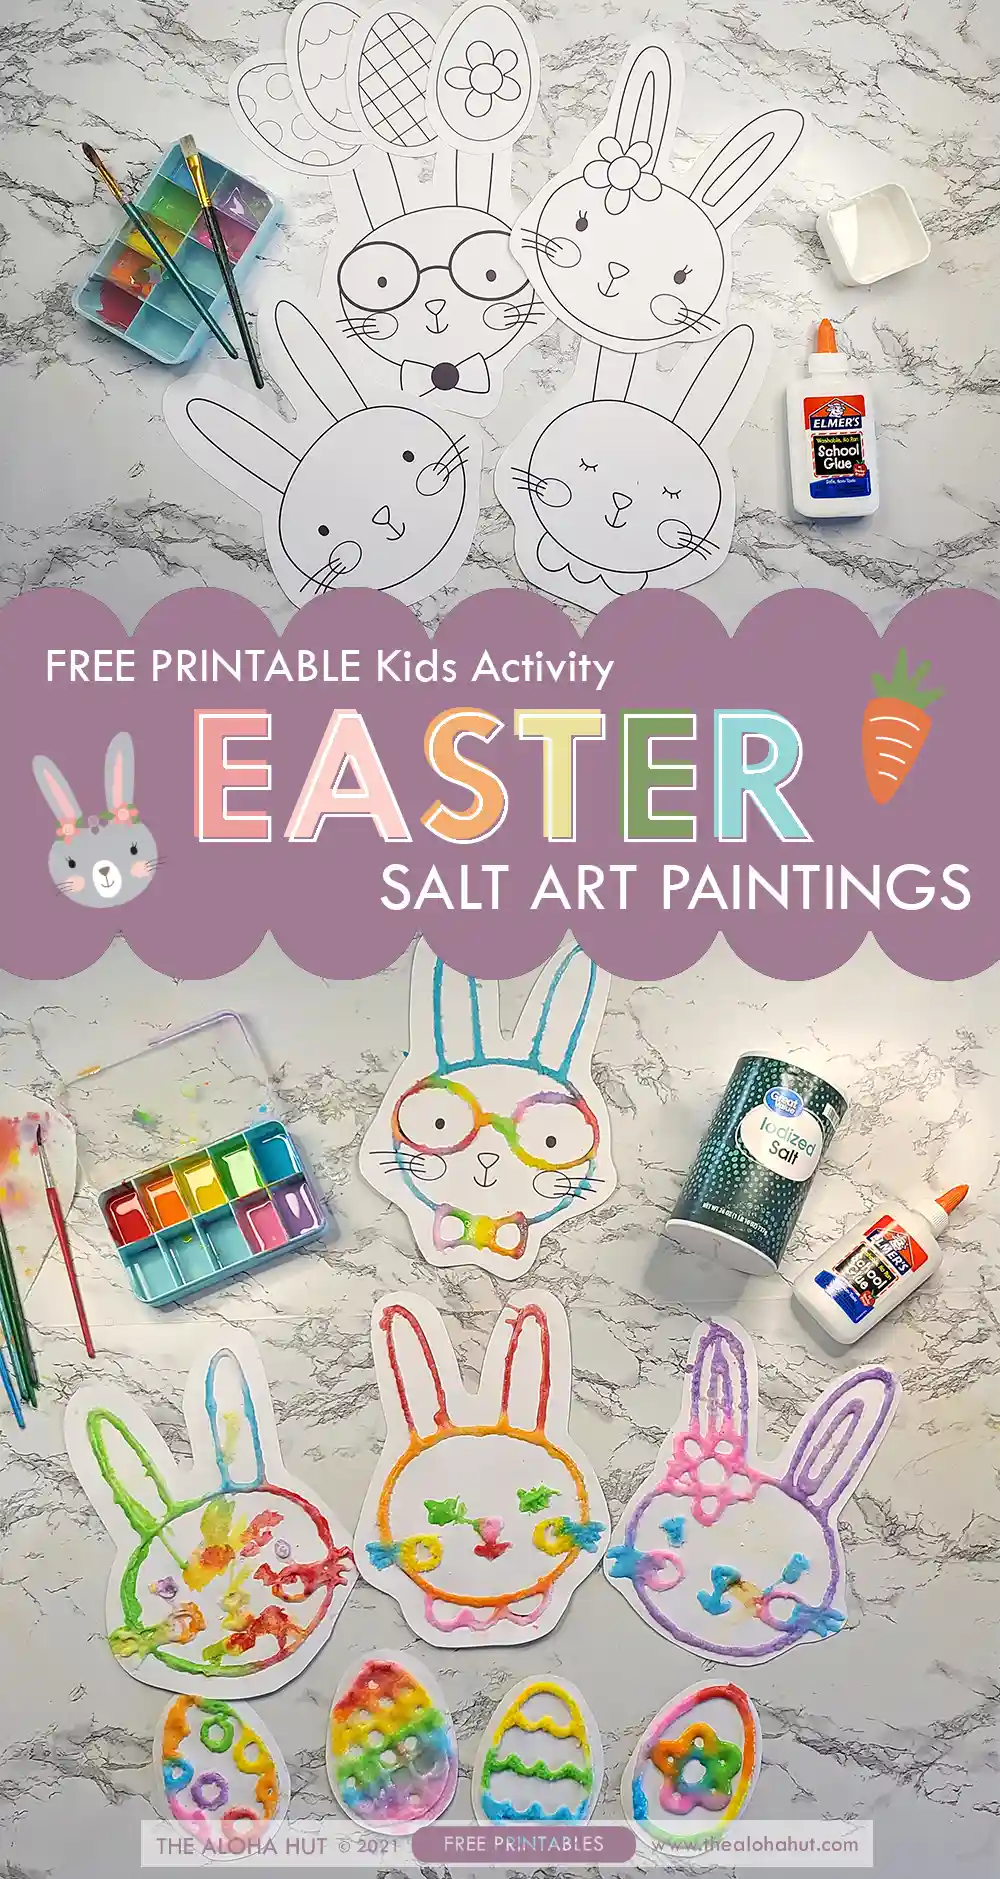 Easter Salt art kids activity and Easter coloring pages. These printable Easter activity pages are the perfect art activity for kids, preschoolers, or for an activity at an Easter party. Use them to make Easter salt art paintings or as Easter coloring pages.